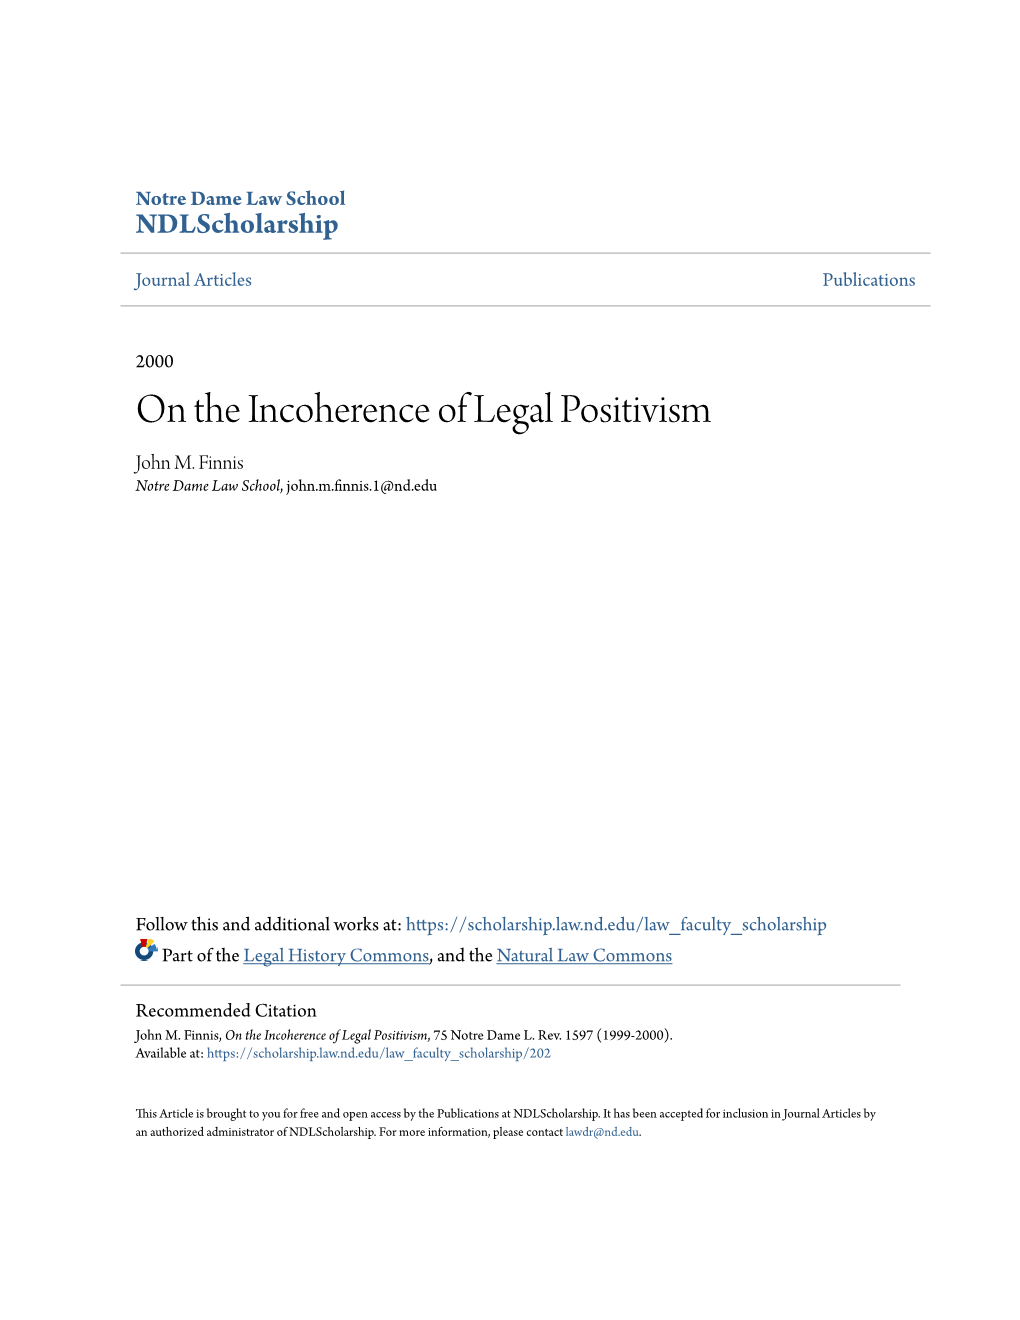 On the Incoherence of Legal Positivism John M